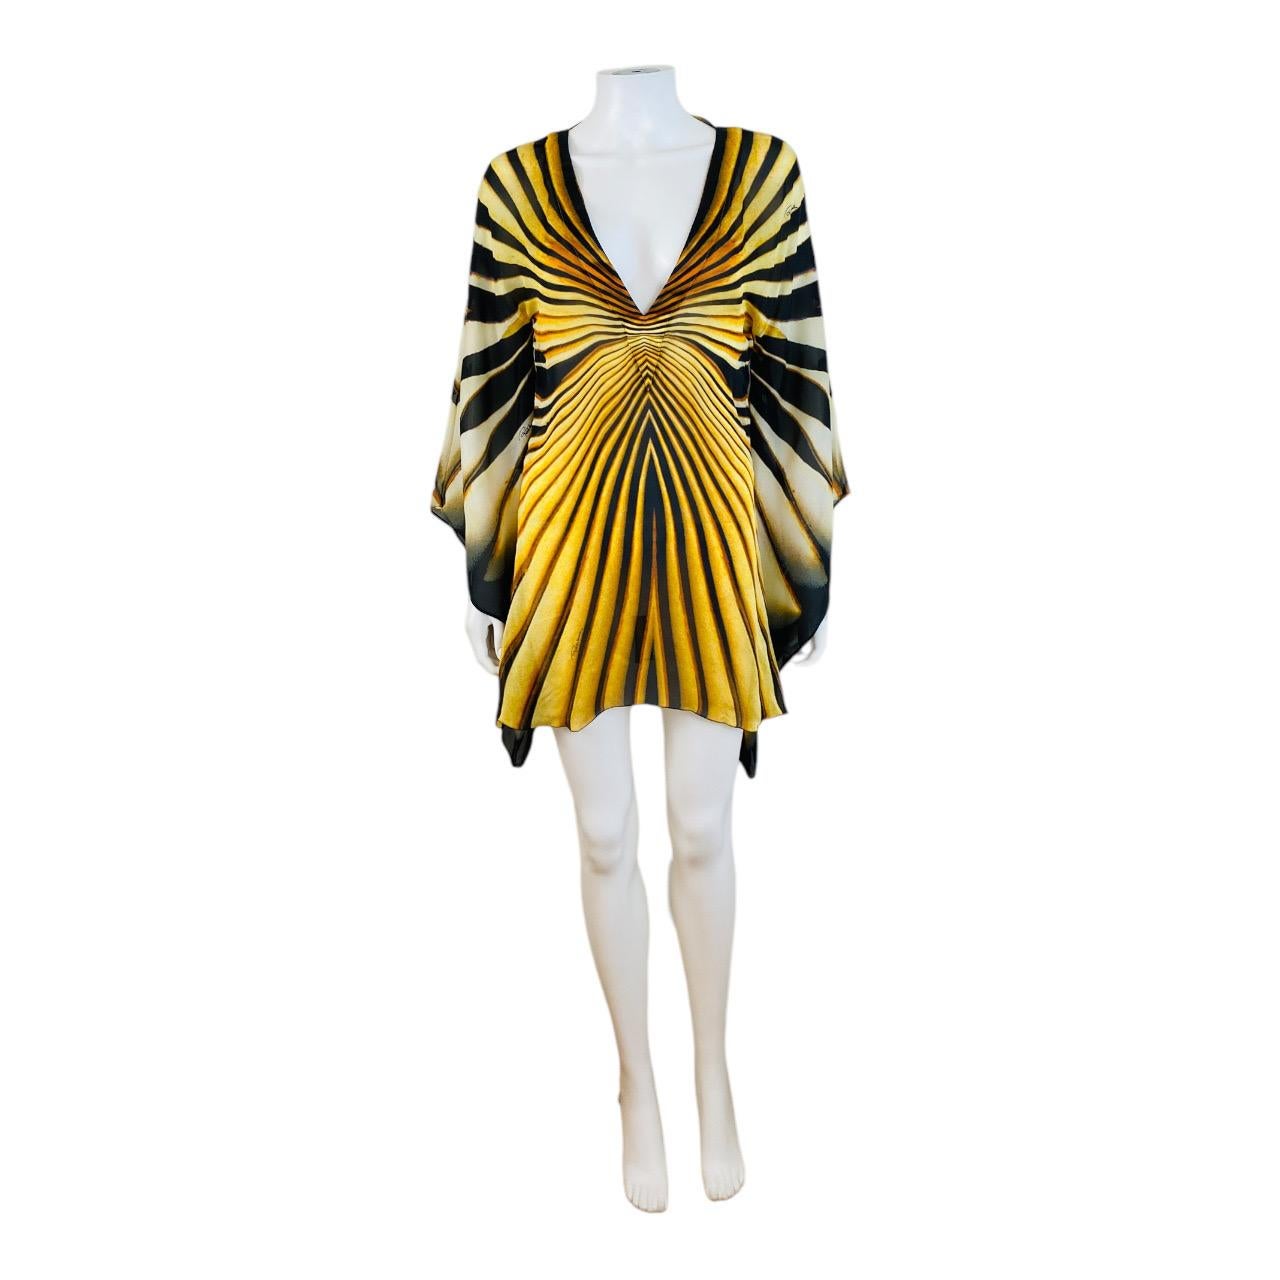 Vintage 2007 Y2K Roberto Cavalli Dress
Maxi version is in the collection of the Victoria & Albert Museum in London
Chiffon silk fabric printed with a black + yellow symmetrical pattern of stripes throughout
V neckline in front + back
Form fitting